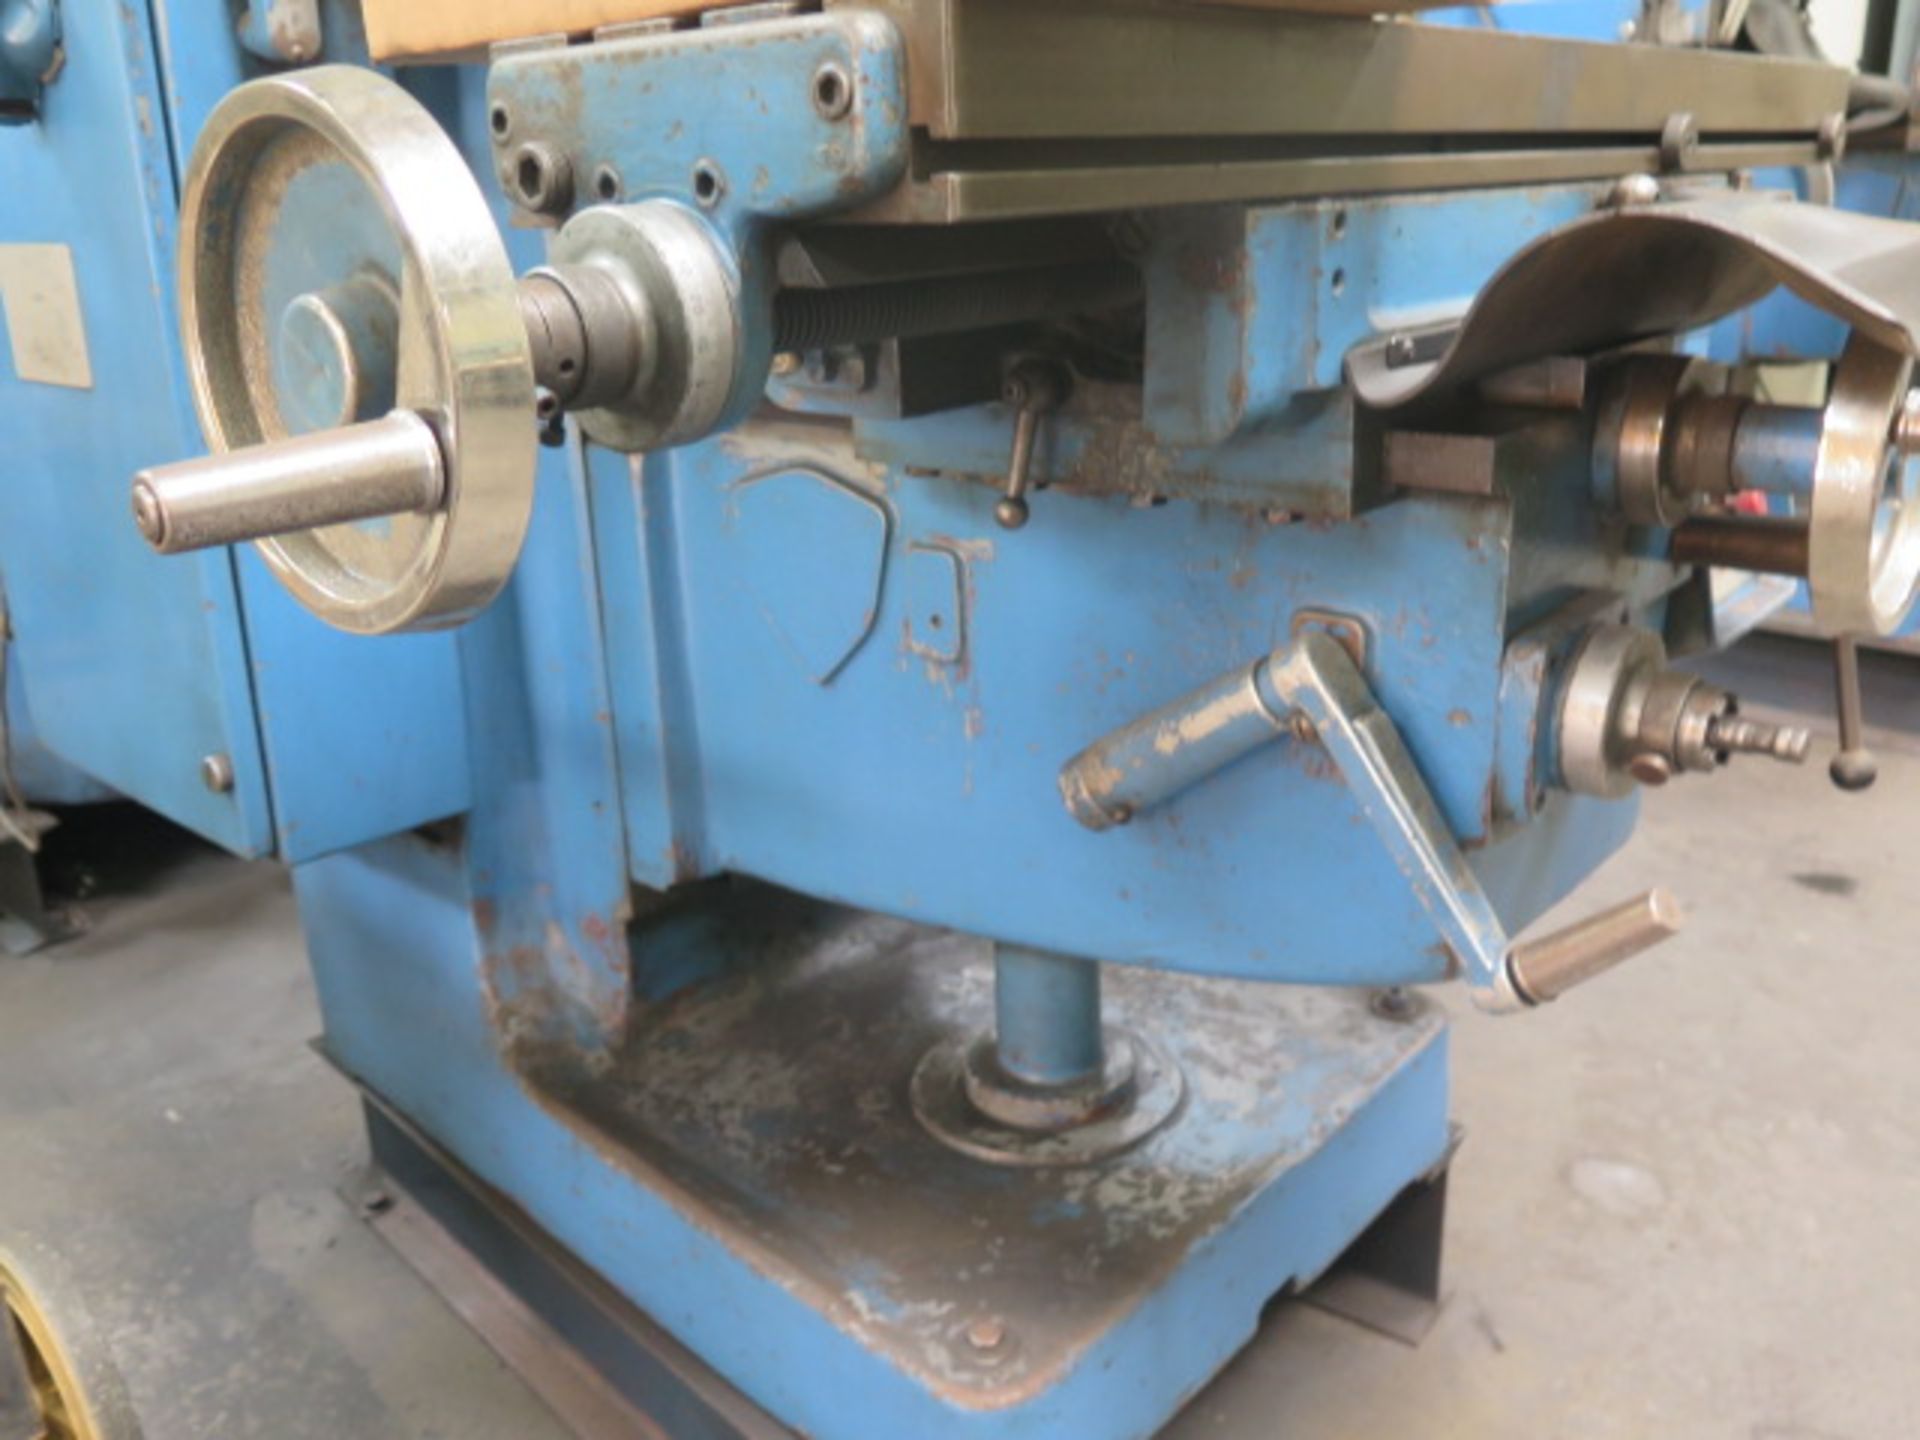 Gorton “Mastermill” mdl. 1-22 Vertical Mill w/ 650-4600 Dial Change RPM, 40-Taper Spindle, Box Ways, - Image 9 of 10